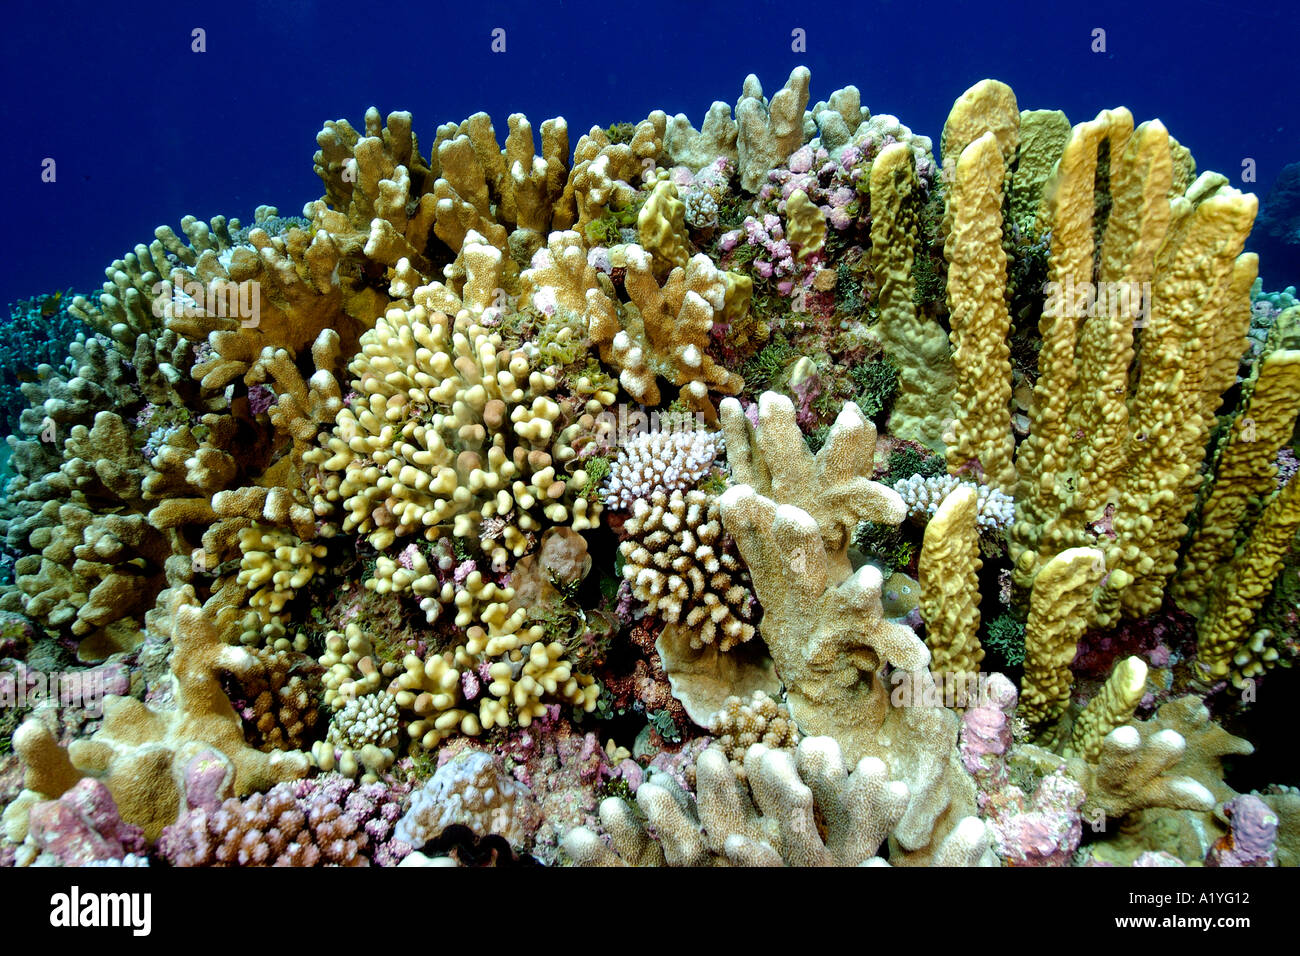 Coral reef including fire coral Millepora platyphylla cauliflower coral Pocillopora meandrina Namu atoll Marshall Islands Stock Photo